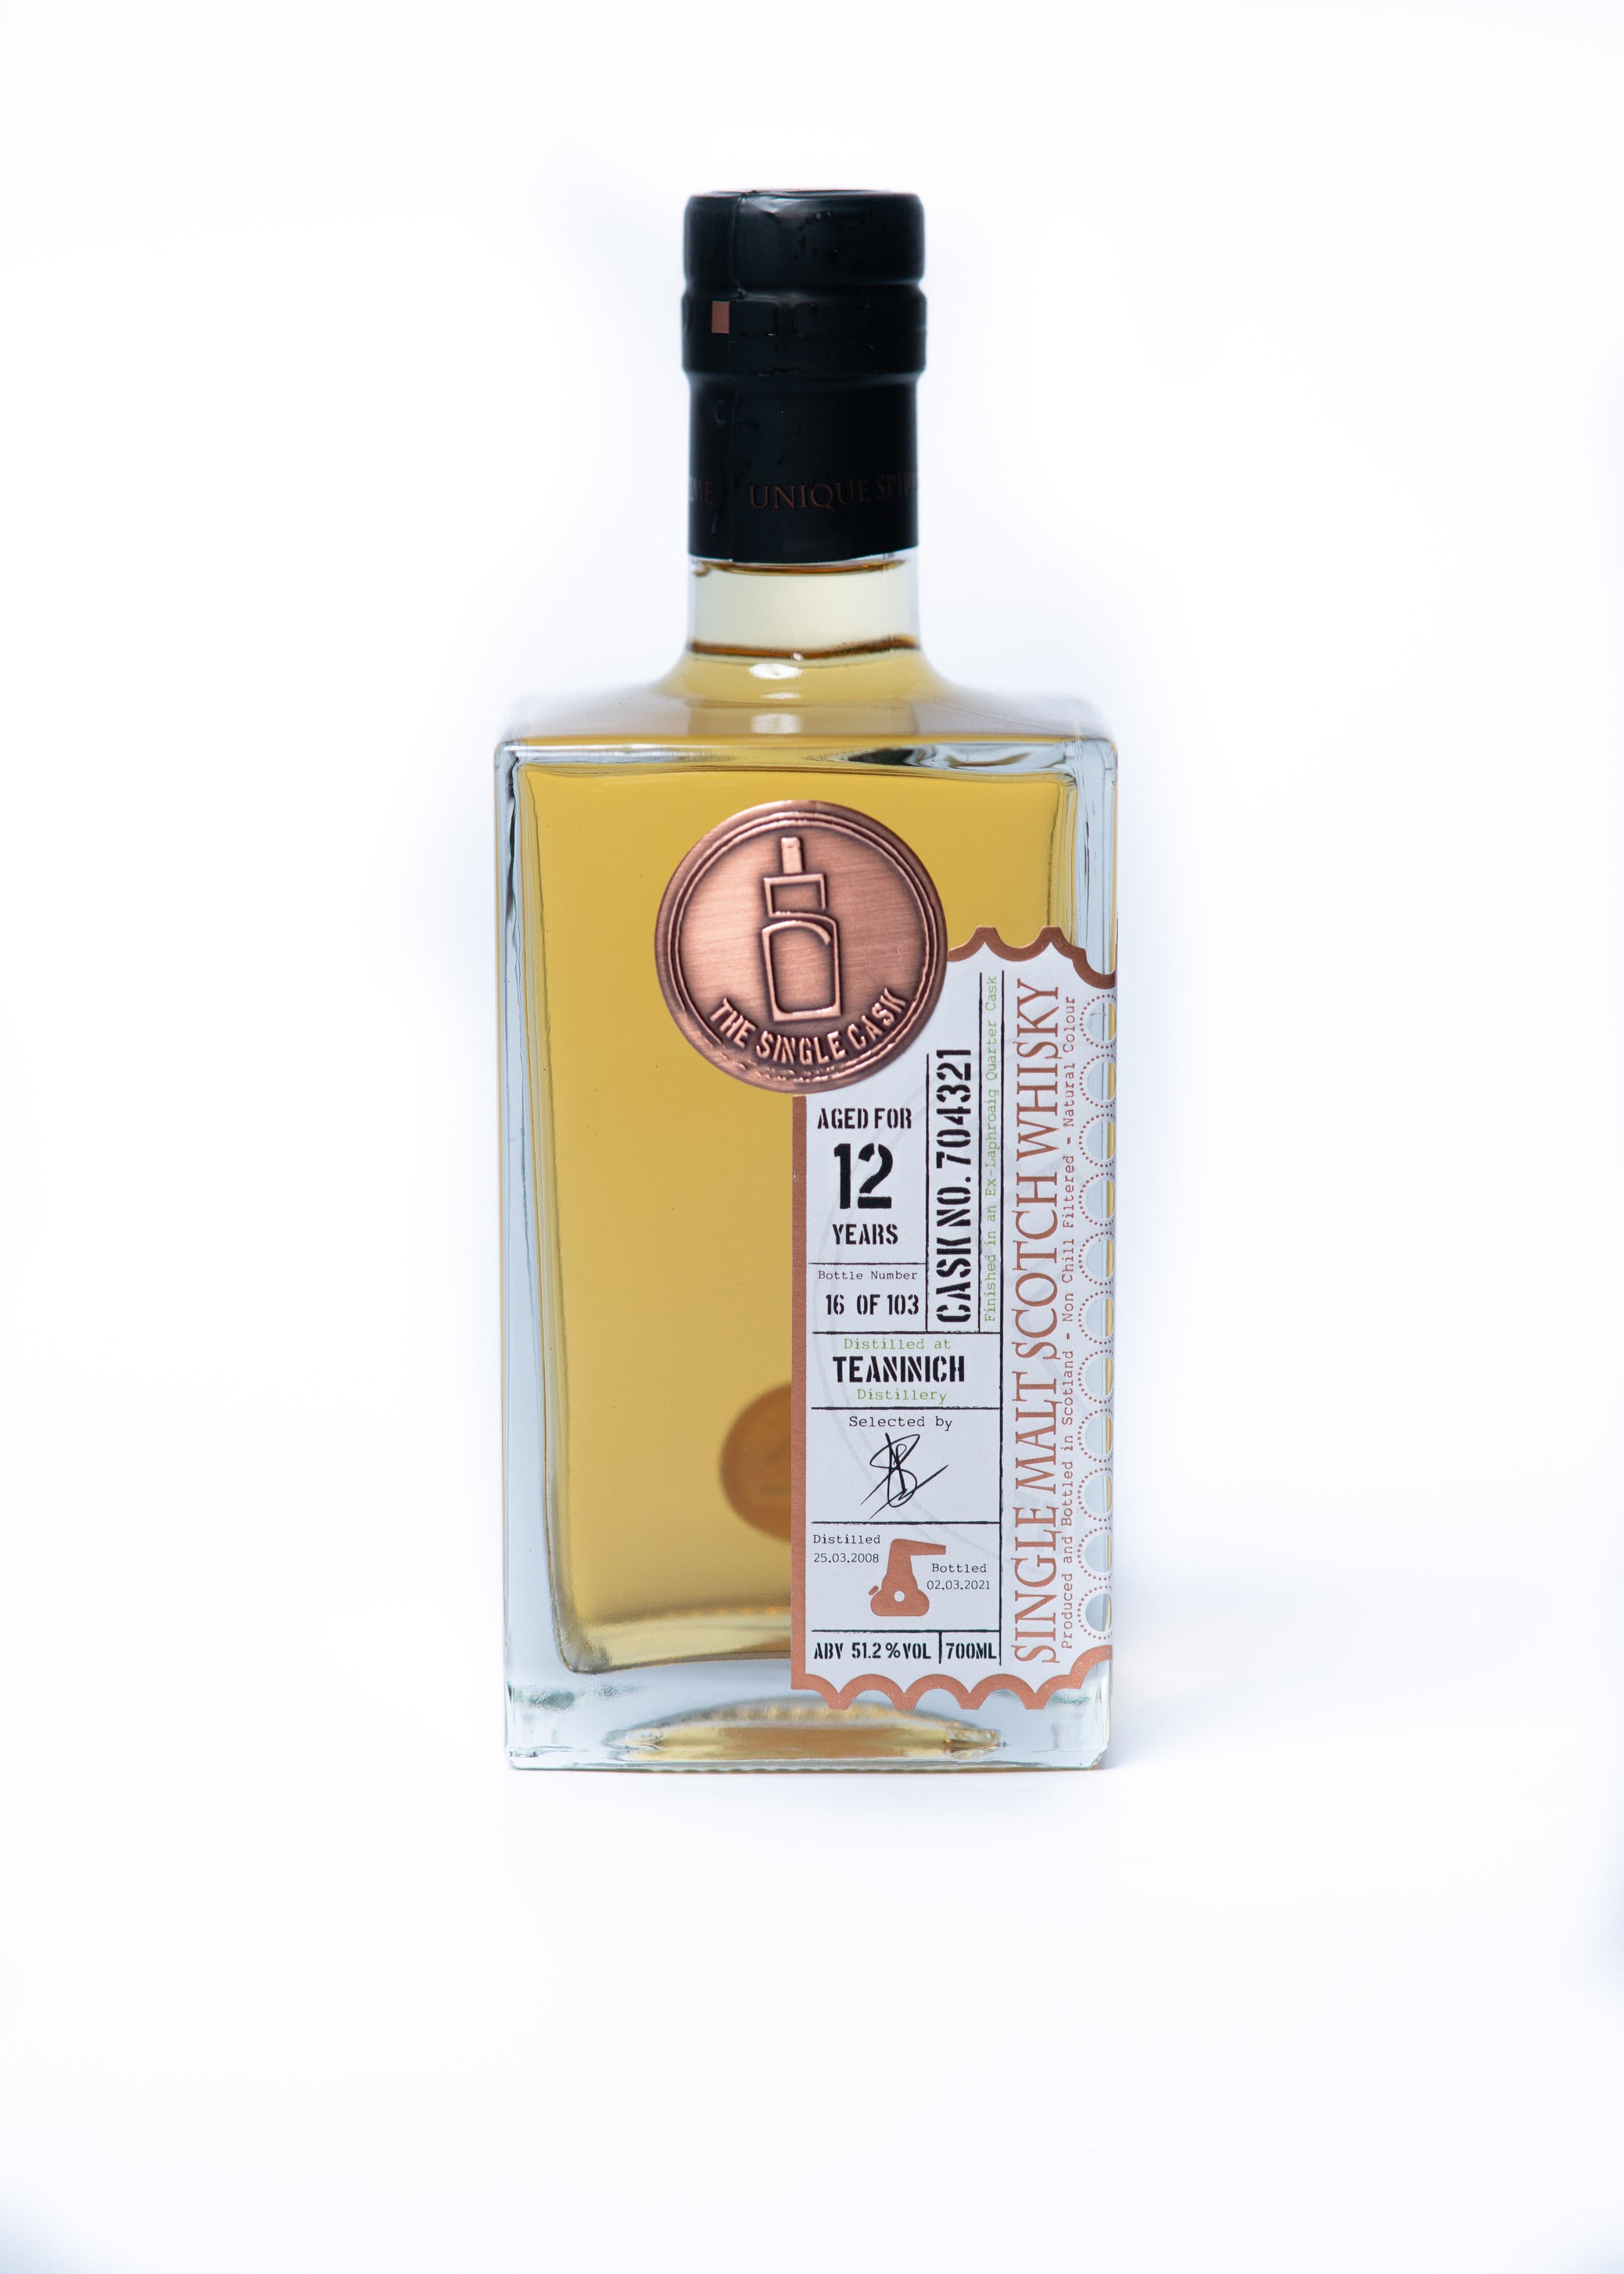 Teaninich 12 years old single malt scotch whisky finished in a Laphroaig cask